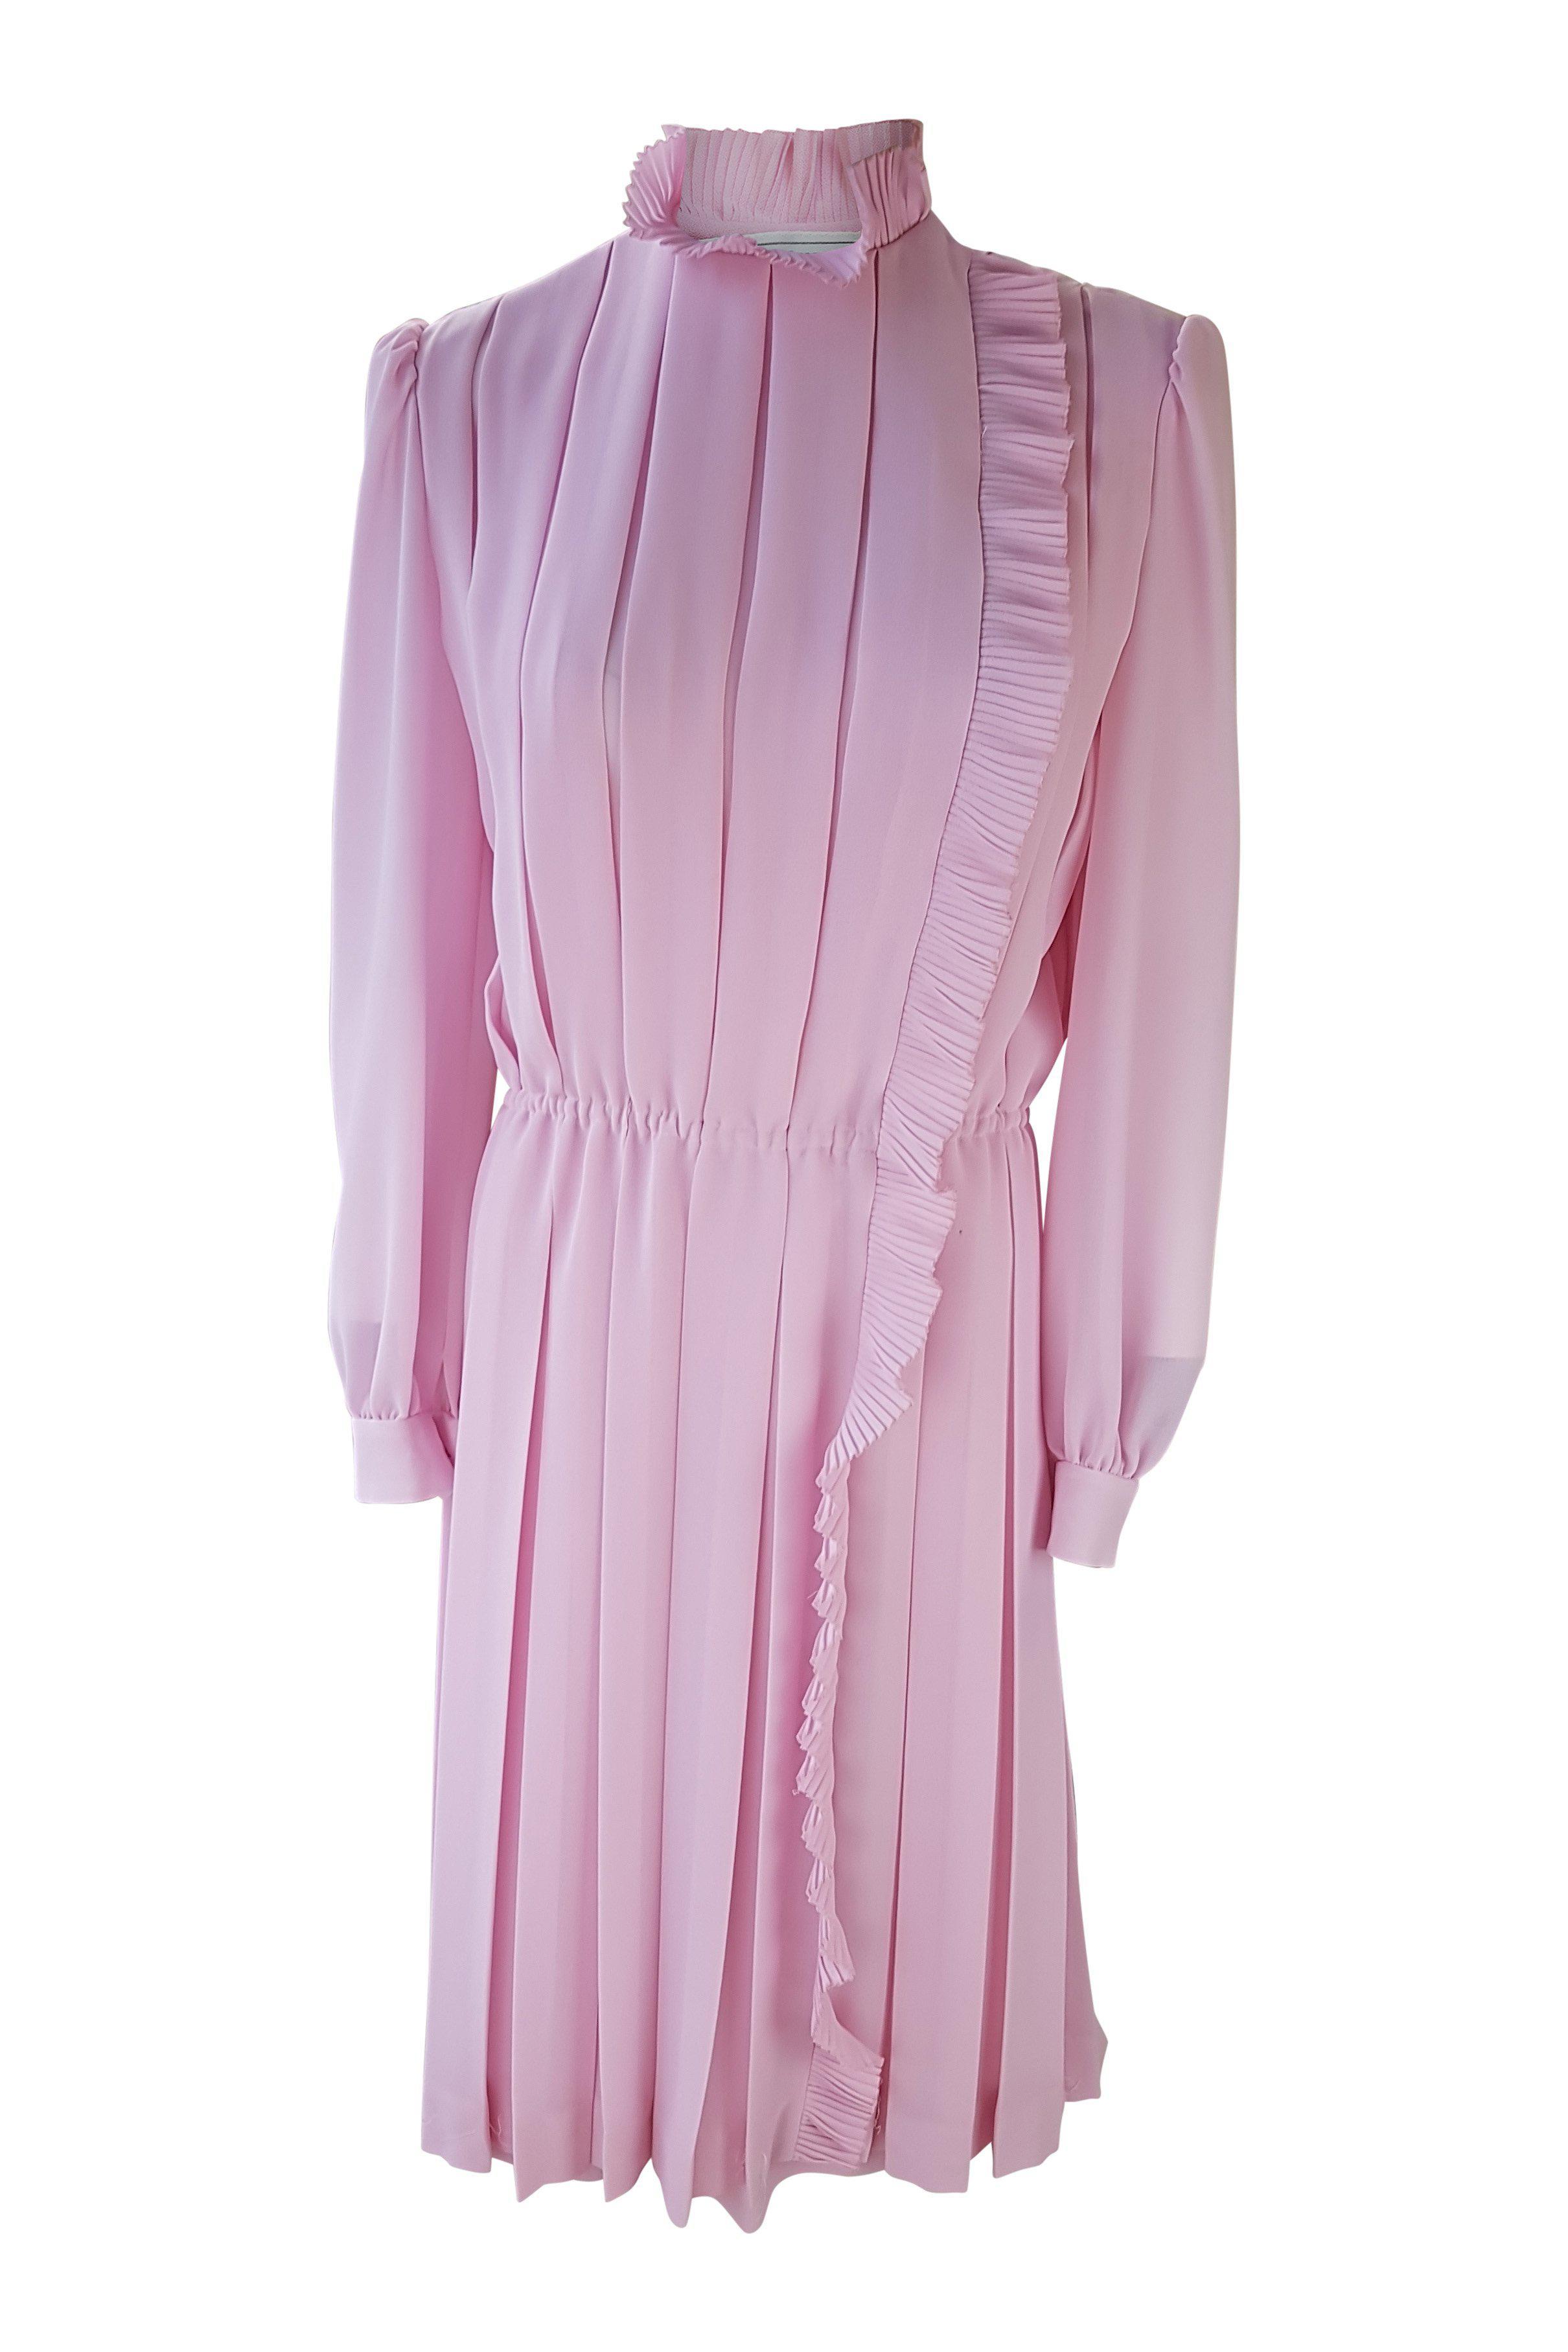 THE WHITE HOUSE Vintage Pink Pleated Long Sleeve Dress (44)-The White House-The Freperie